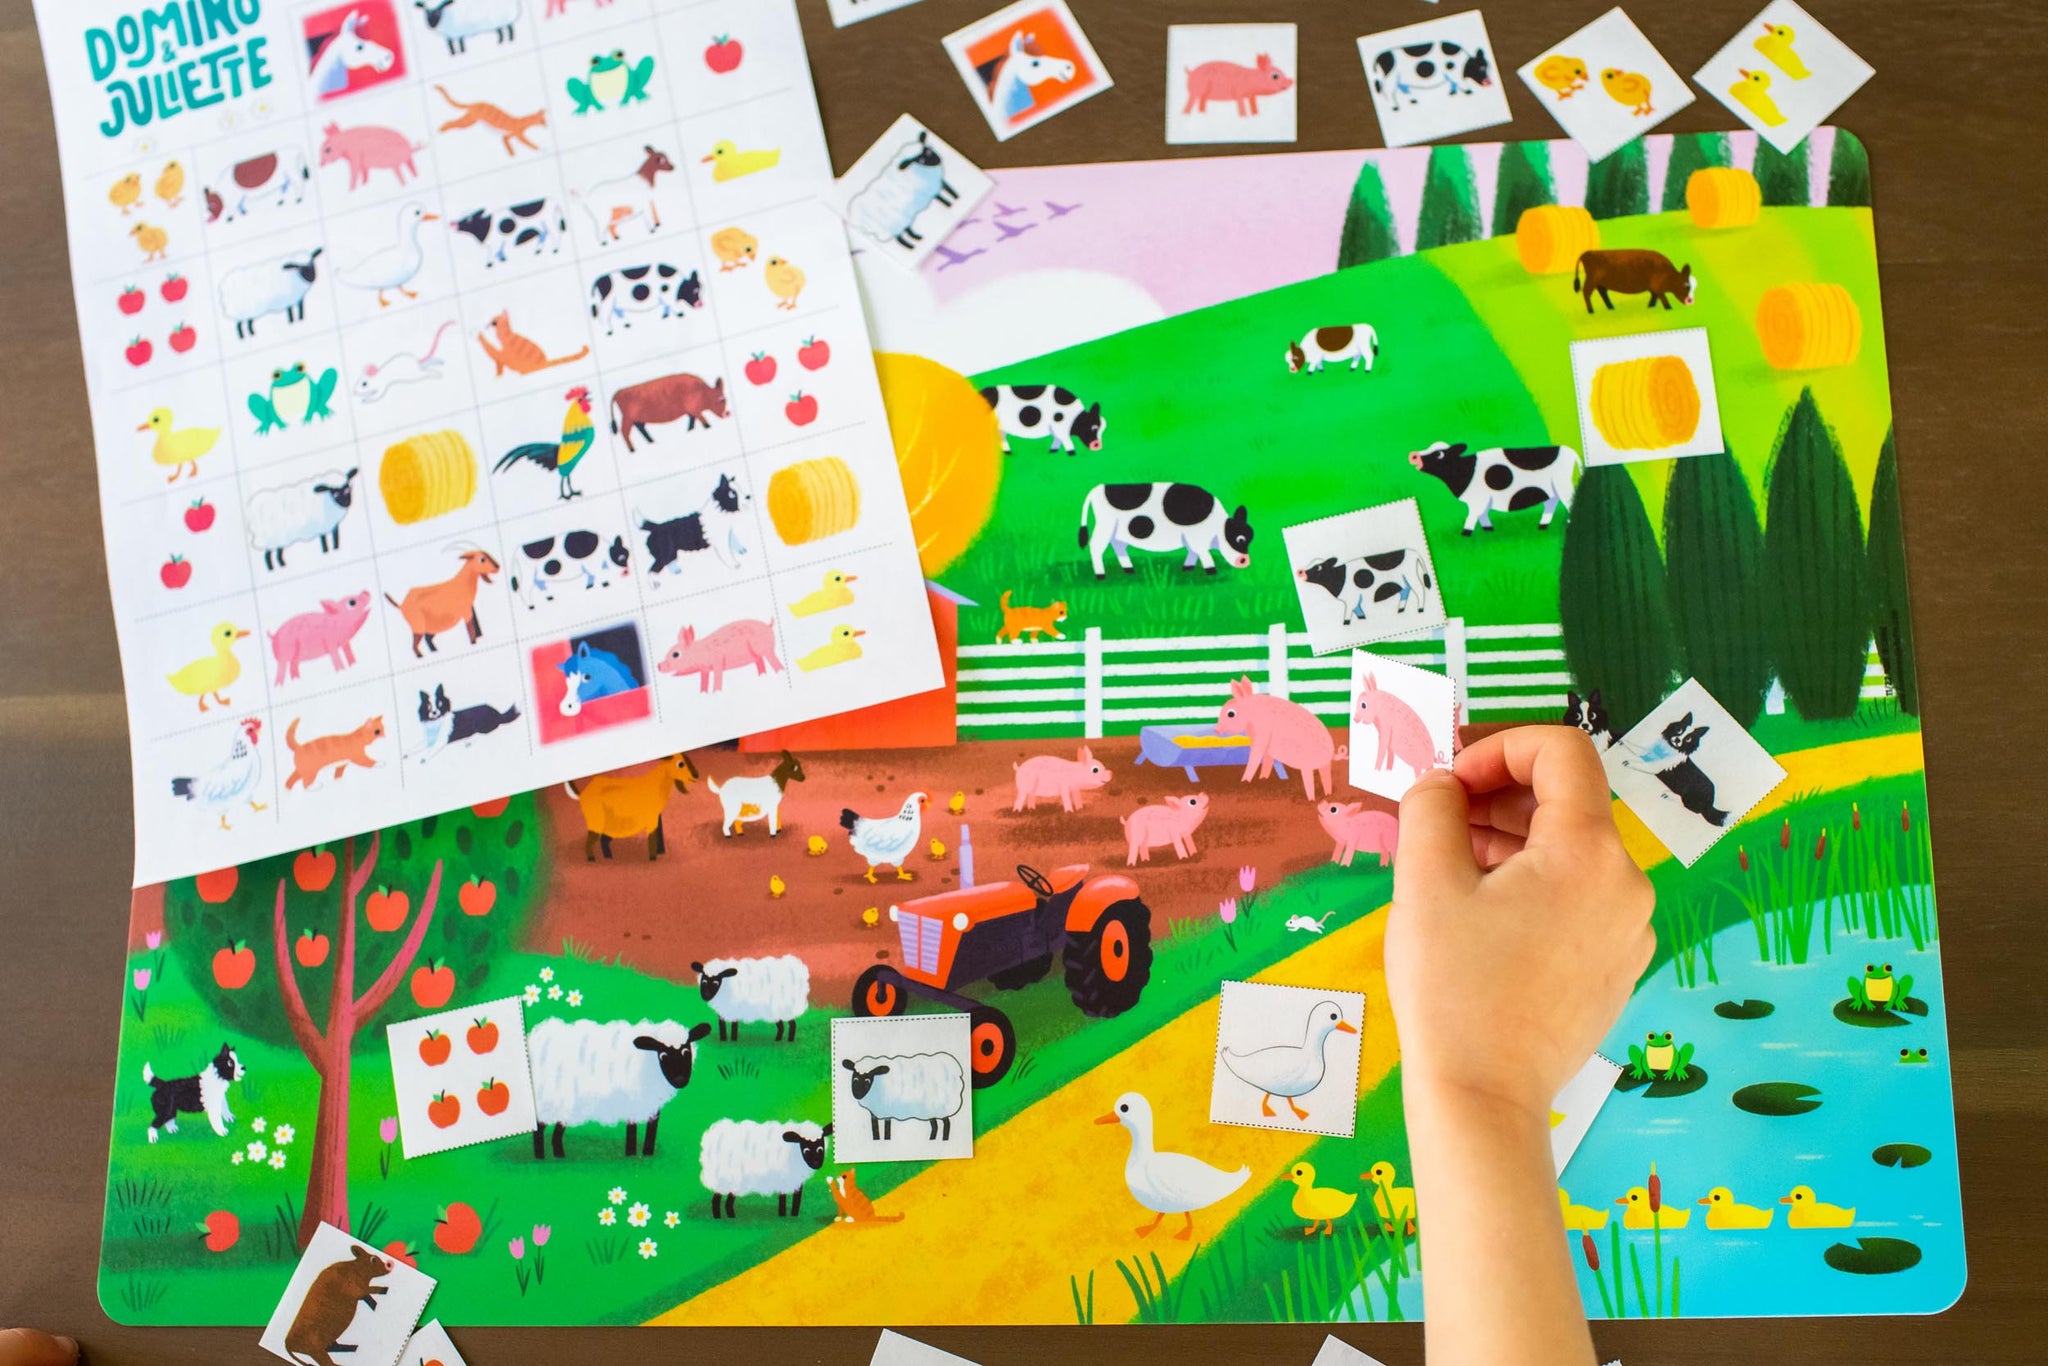 On the Farm Placemat, Farm Animal Placemats, Children's Placemat, Educational Tool for Kids at Mealtime, Farm placemats, Kindergartner-friendly activity mat with farm theme, Placemat designed for 2-year-olds with fun farm imagery, Toddlers playing and learning on farm-themed placemat, Engaging and educational farm-themed placemat for 3-year-olds, Placemat with fun farm activities for preschoolers, Engaging and entertaining placemat activities for young kids with farm animals